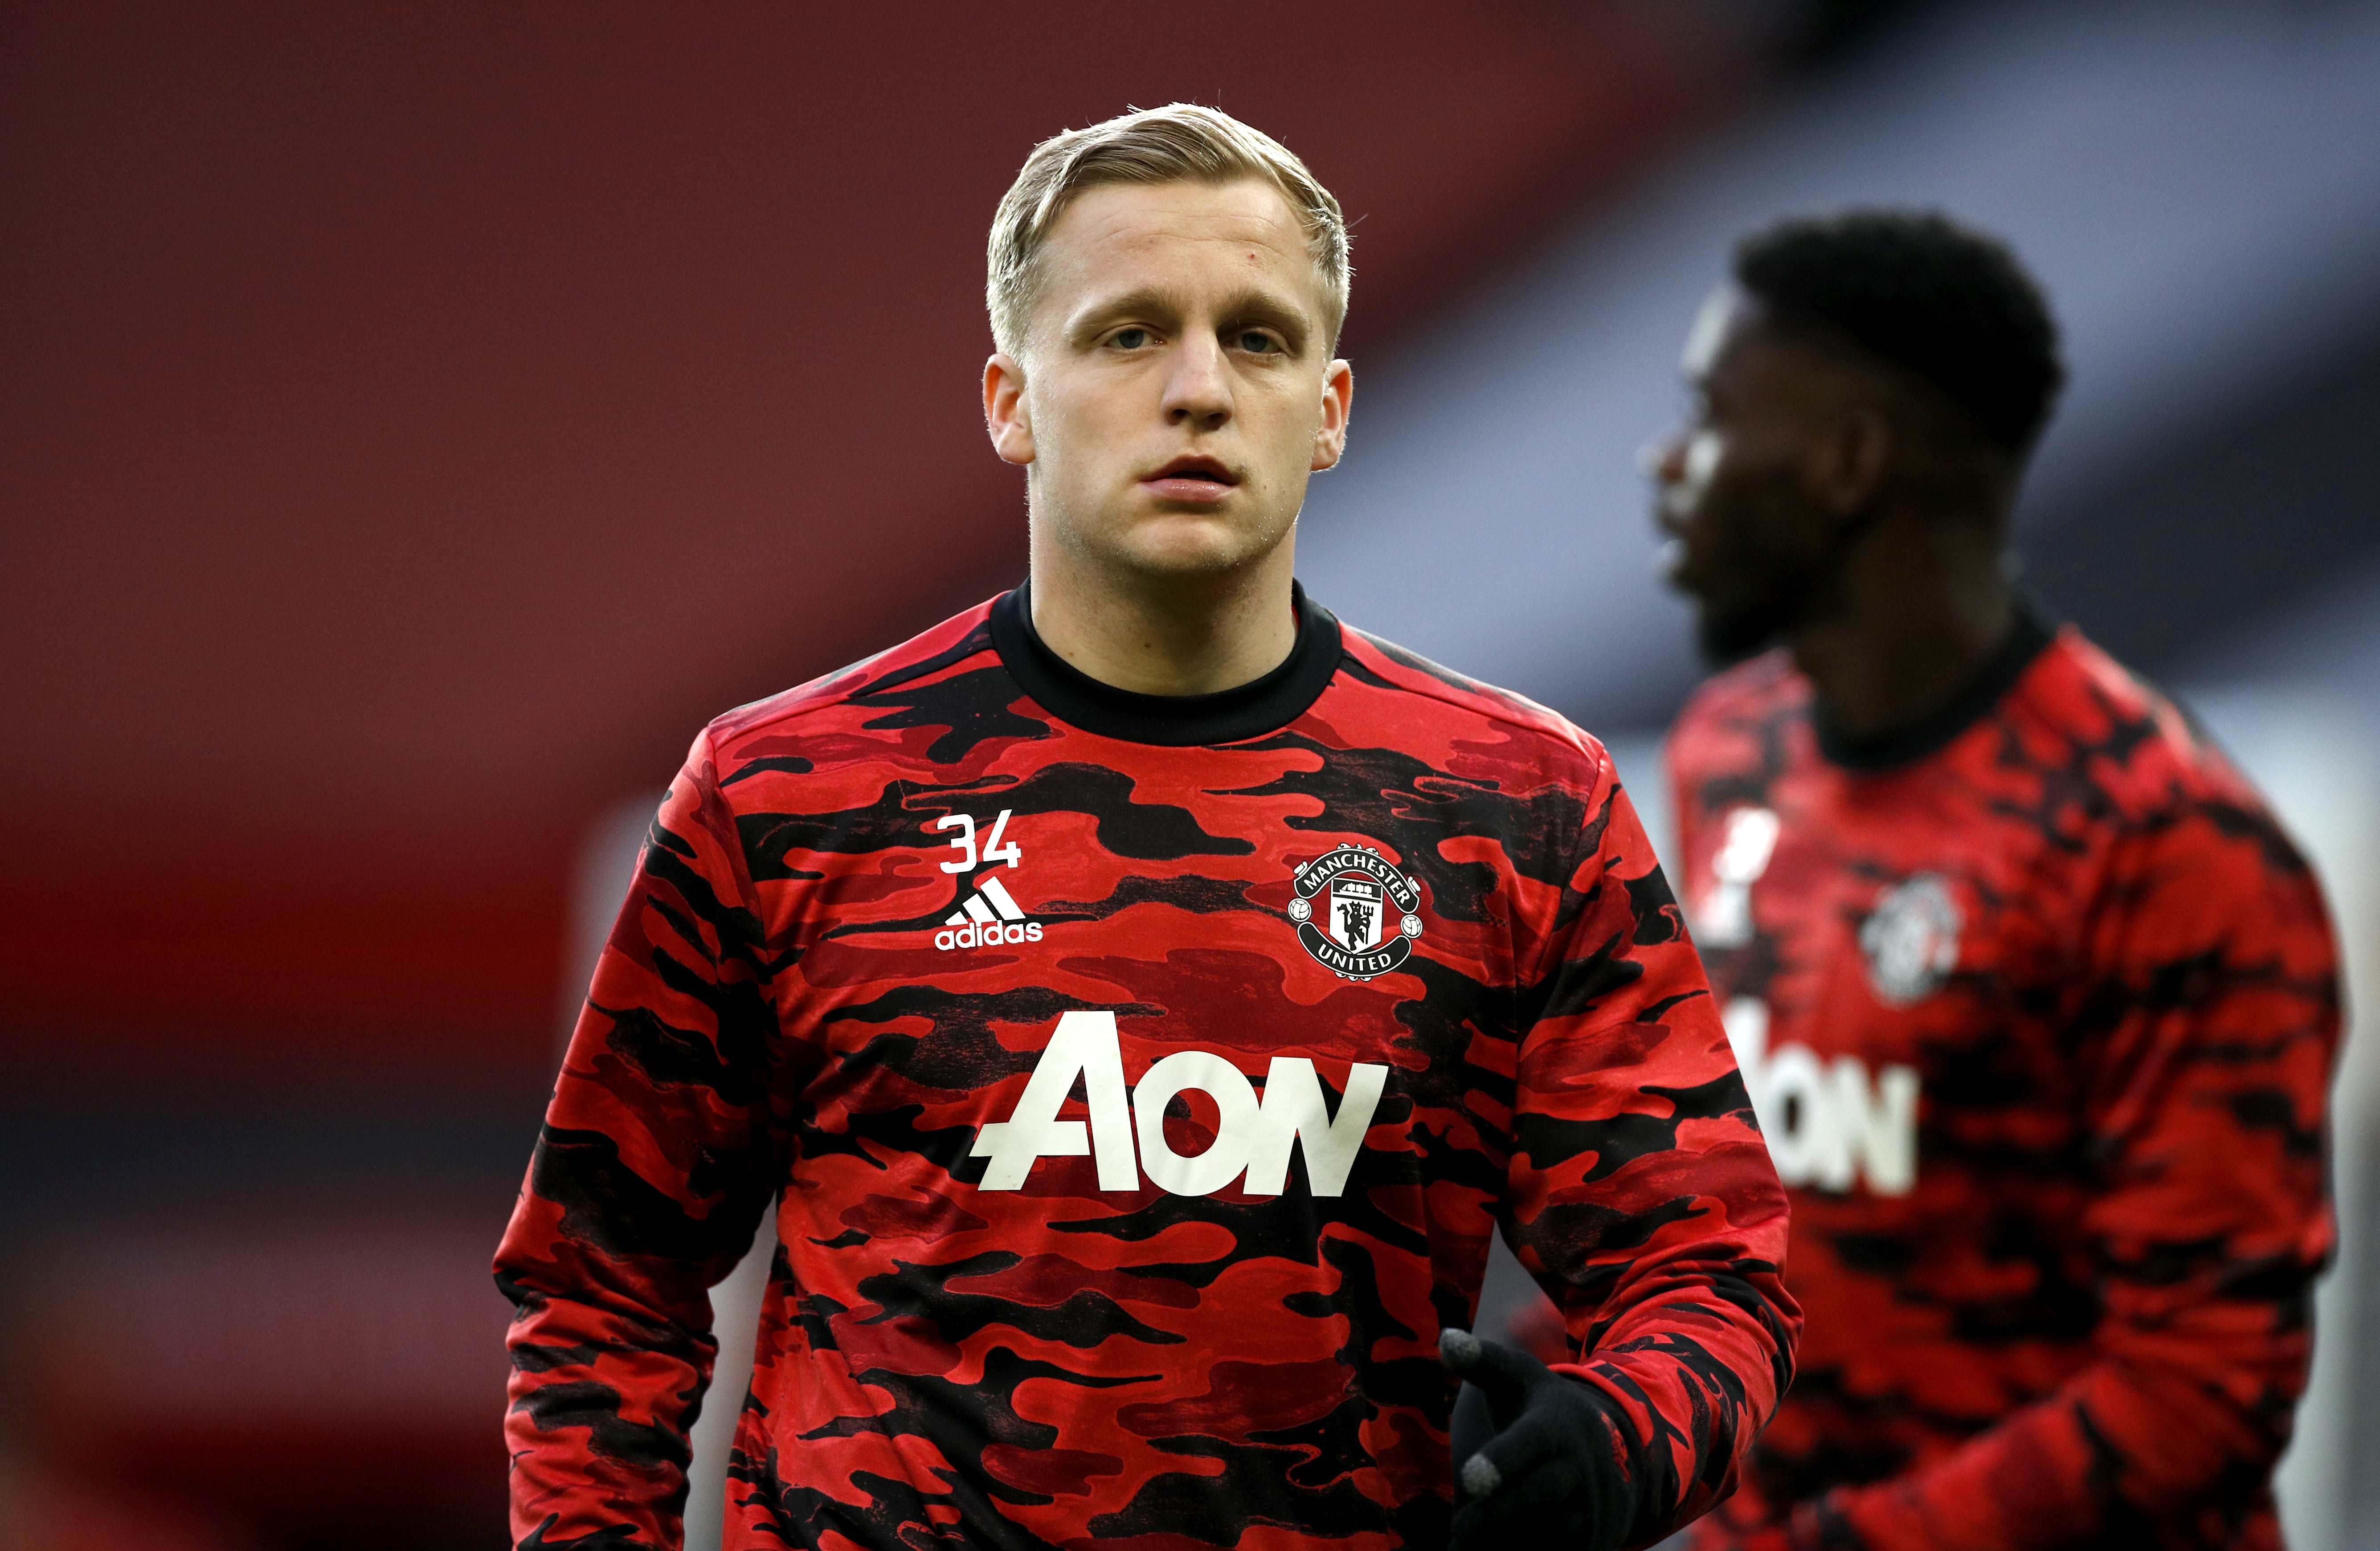 Ole Gunnar Solskjaer insists Donny Van De Beek “will get his chances” at Manchester United this season (Phil Noble/PA)